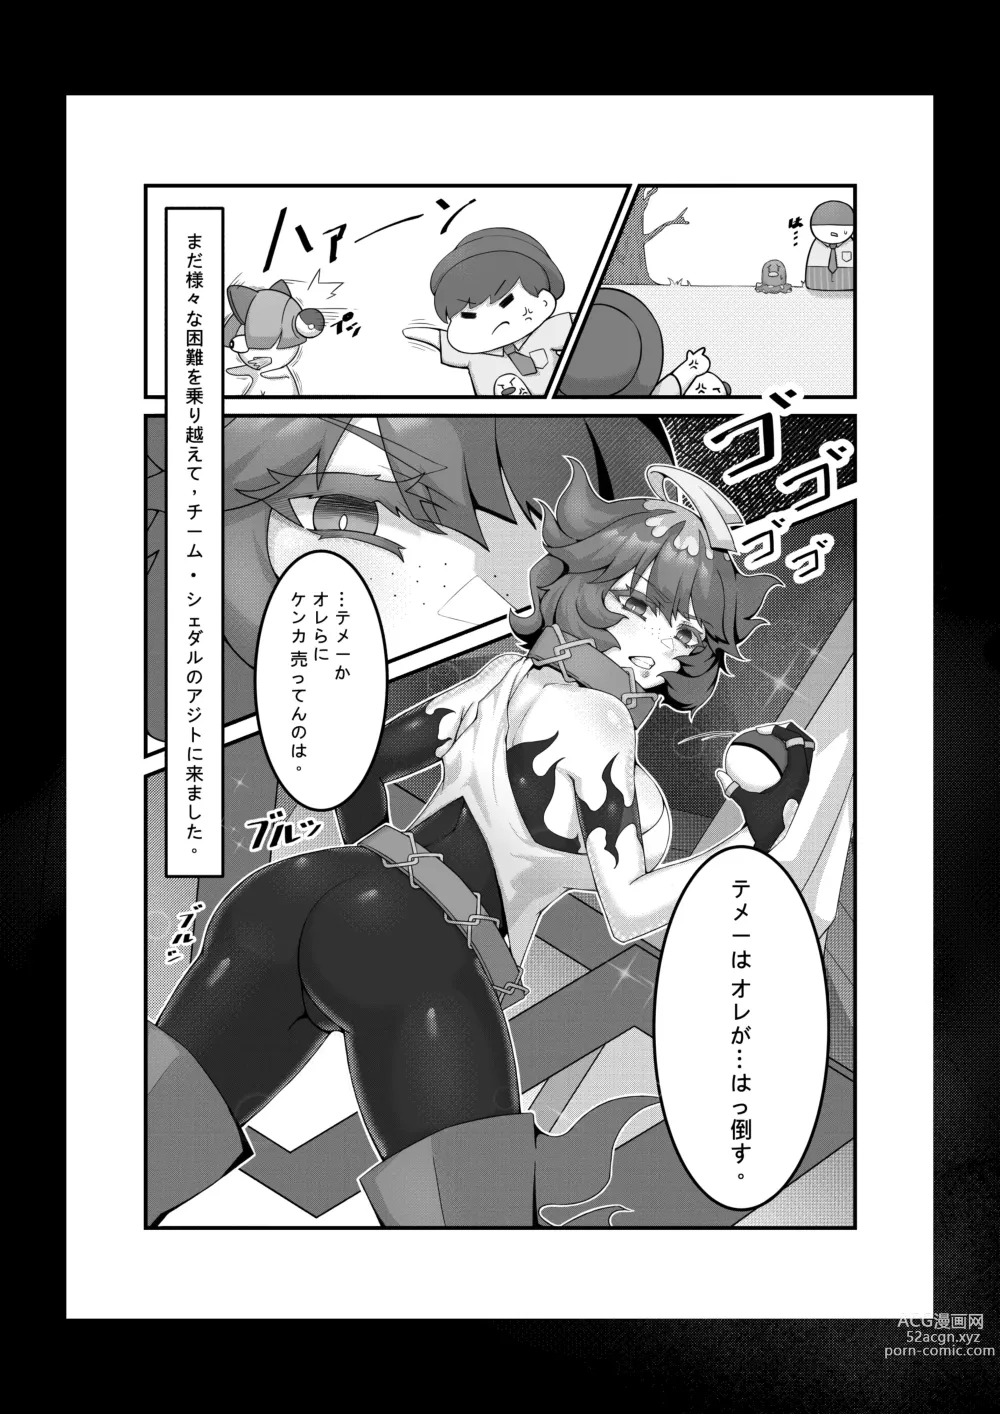 Page 2 of doujinshi Sex after Versus - Meloco 2